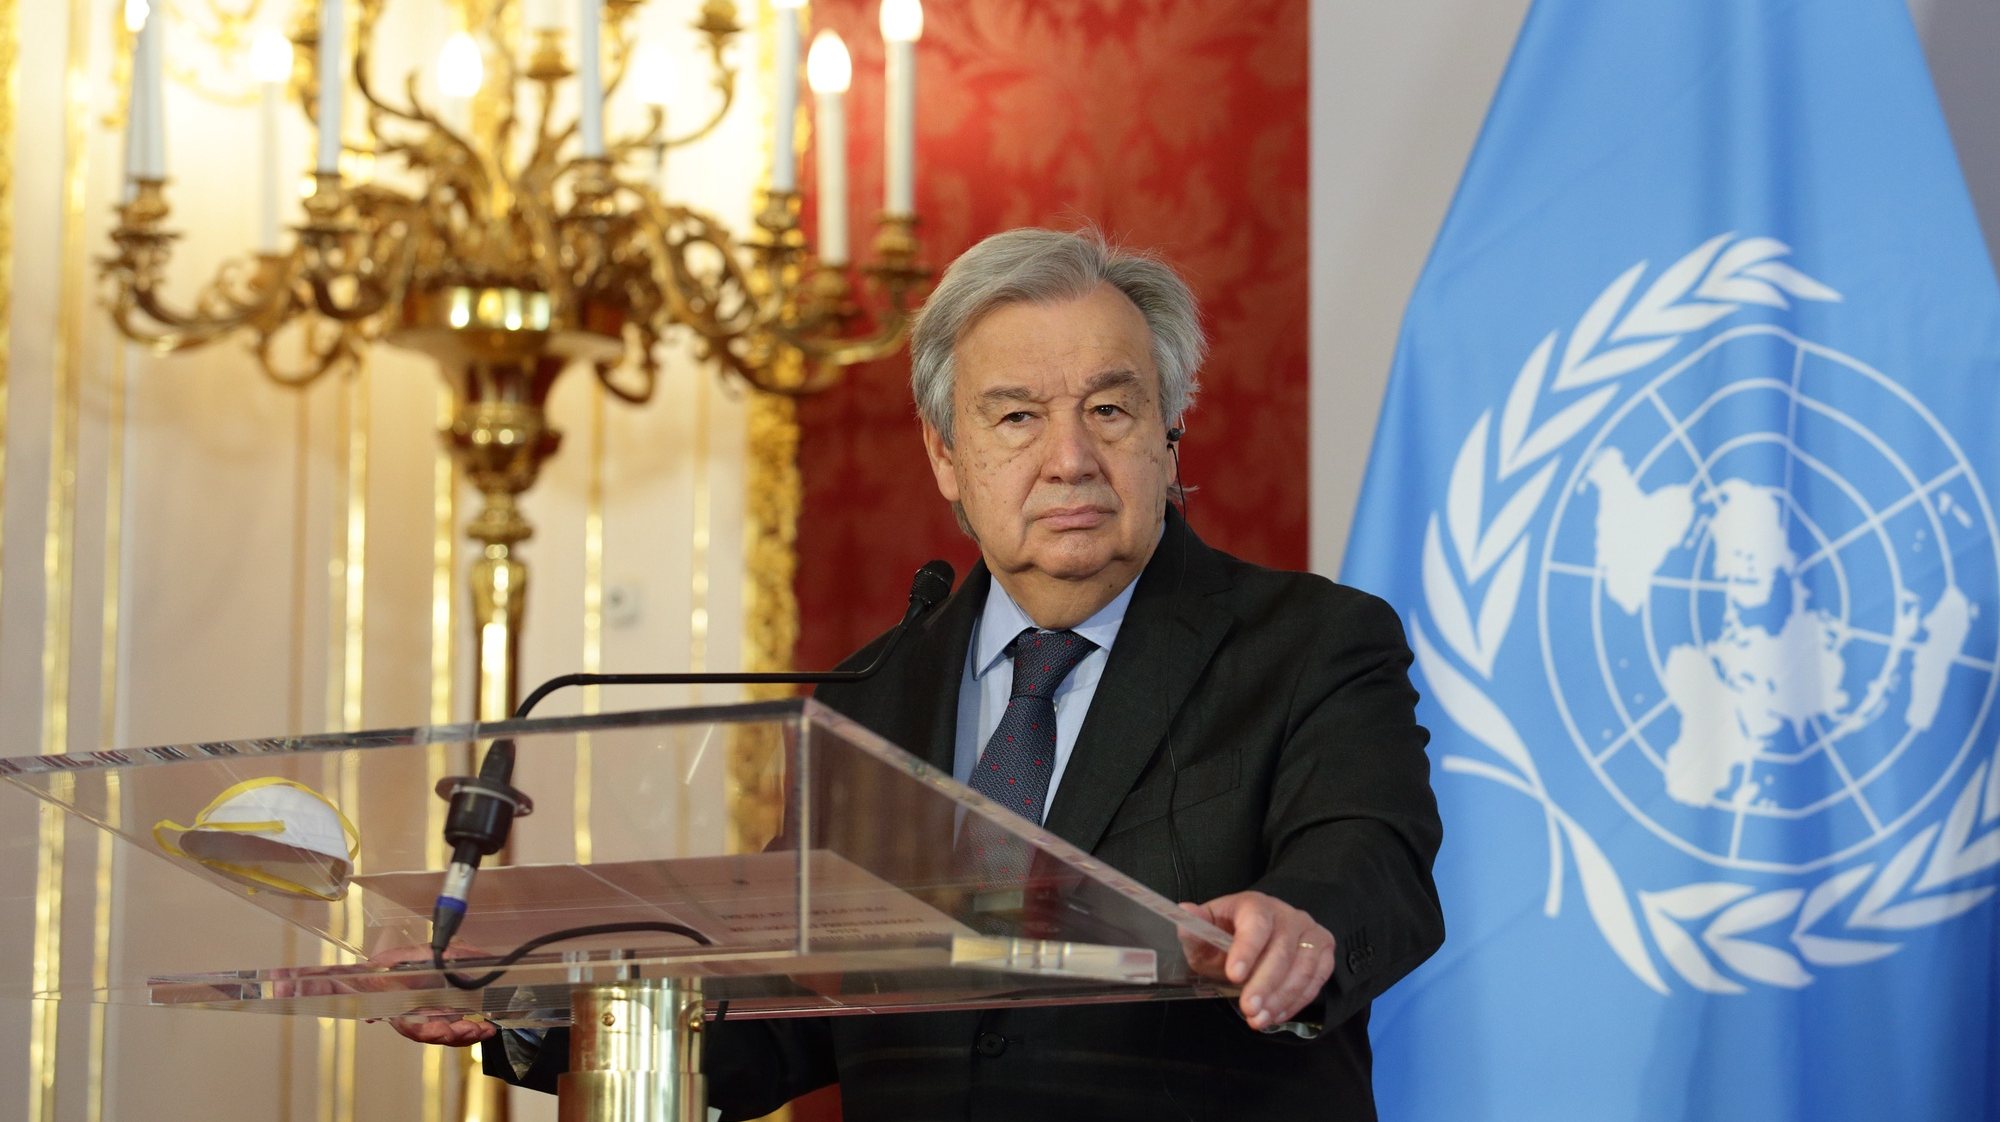 epa09939668 UN Secretary-General Antonio Guterres listens during a news conference after his meeting with Austrian President Alexander Van der Bellen (not pictured) at the Presidential office in Vienna, Austria, 11 May 2022. Guterres is on a three day trip in Vienna to join the UN System Chief Executives Board for Coordination (CEB).  EPA/HEINZ-PETER BADER